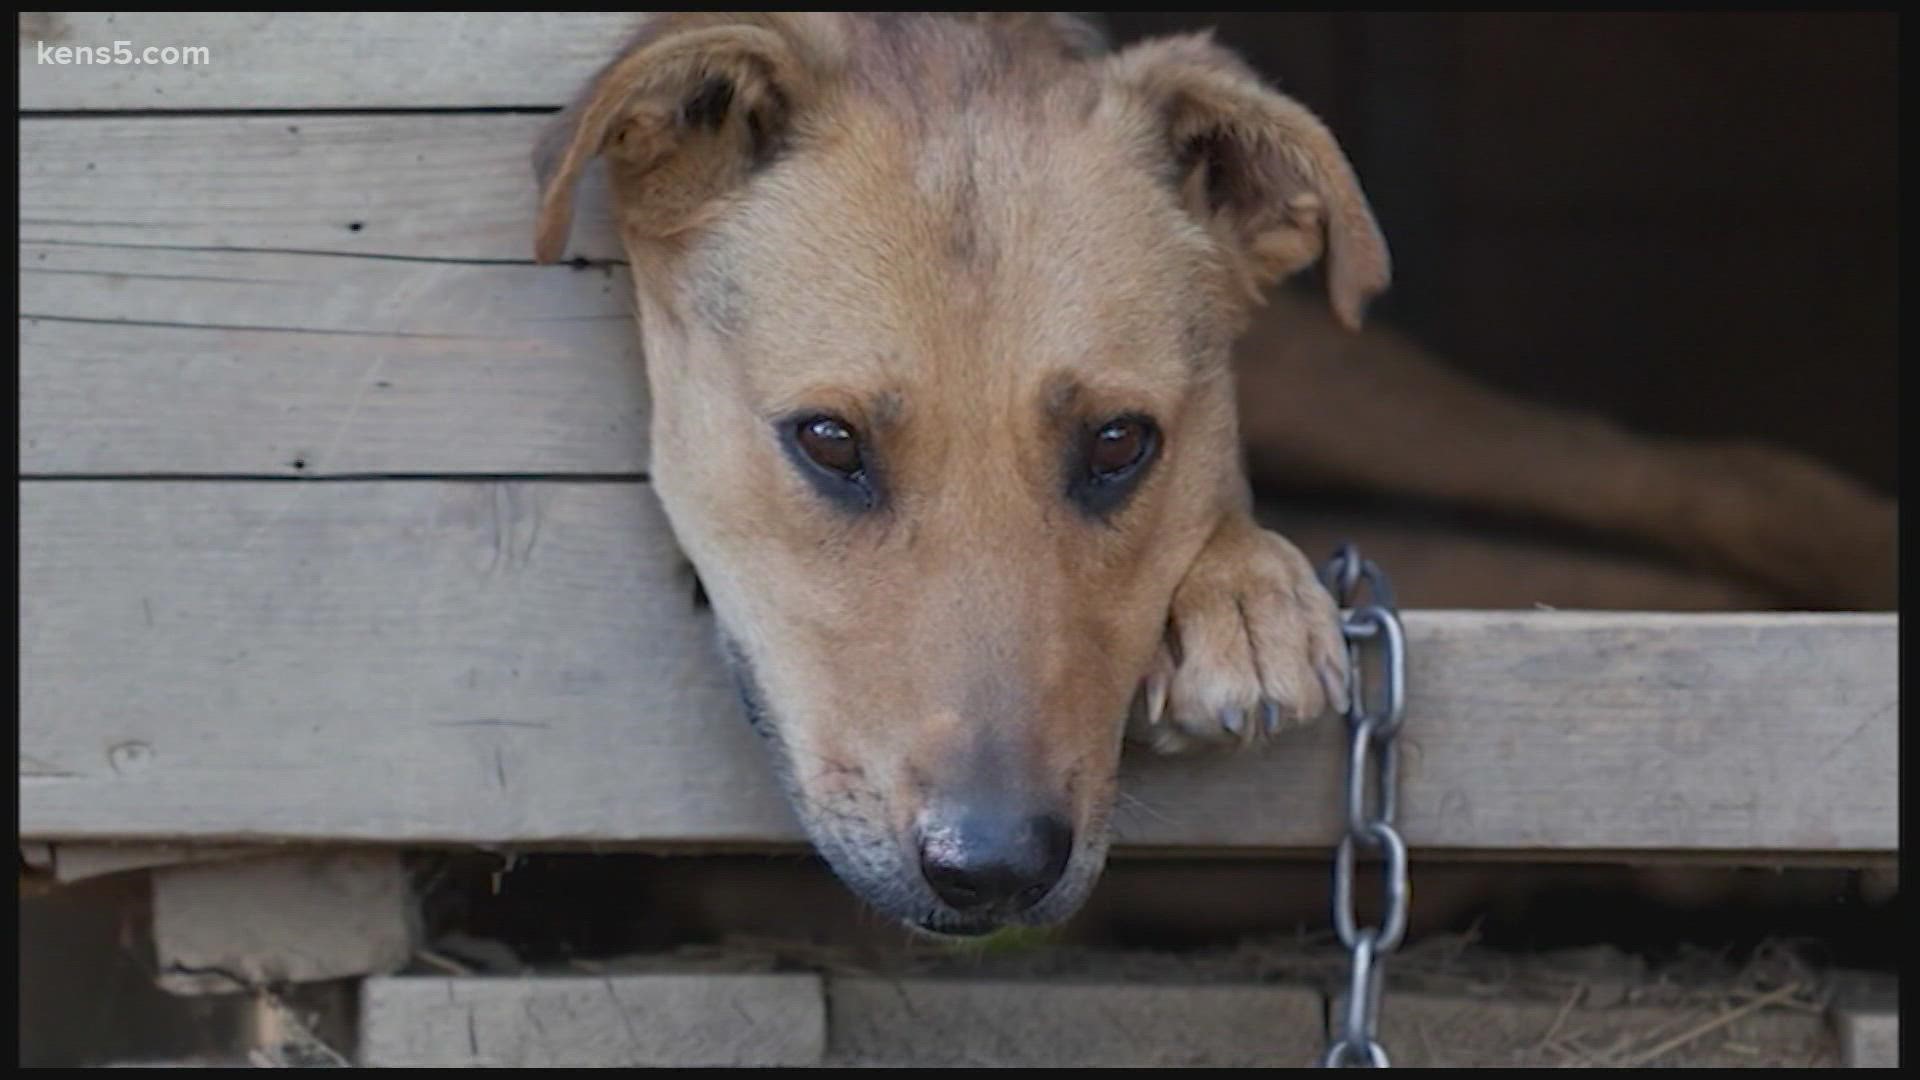 The new state law doesn’t change much for dog owners in San Antonio but it could mean harsher penalties for those using chains to tether their animals.